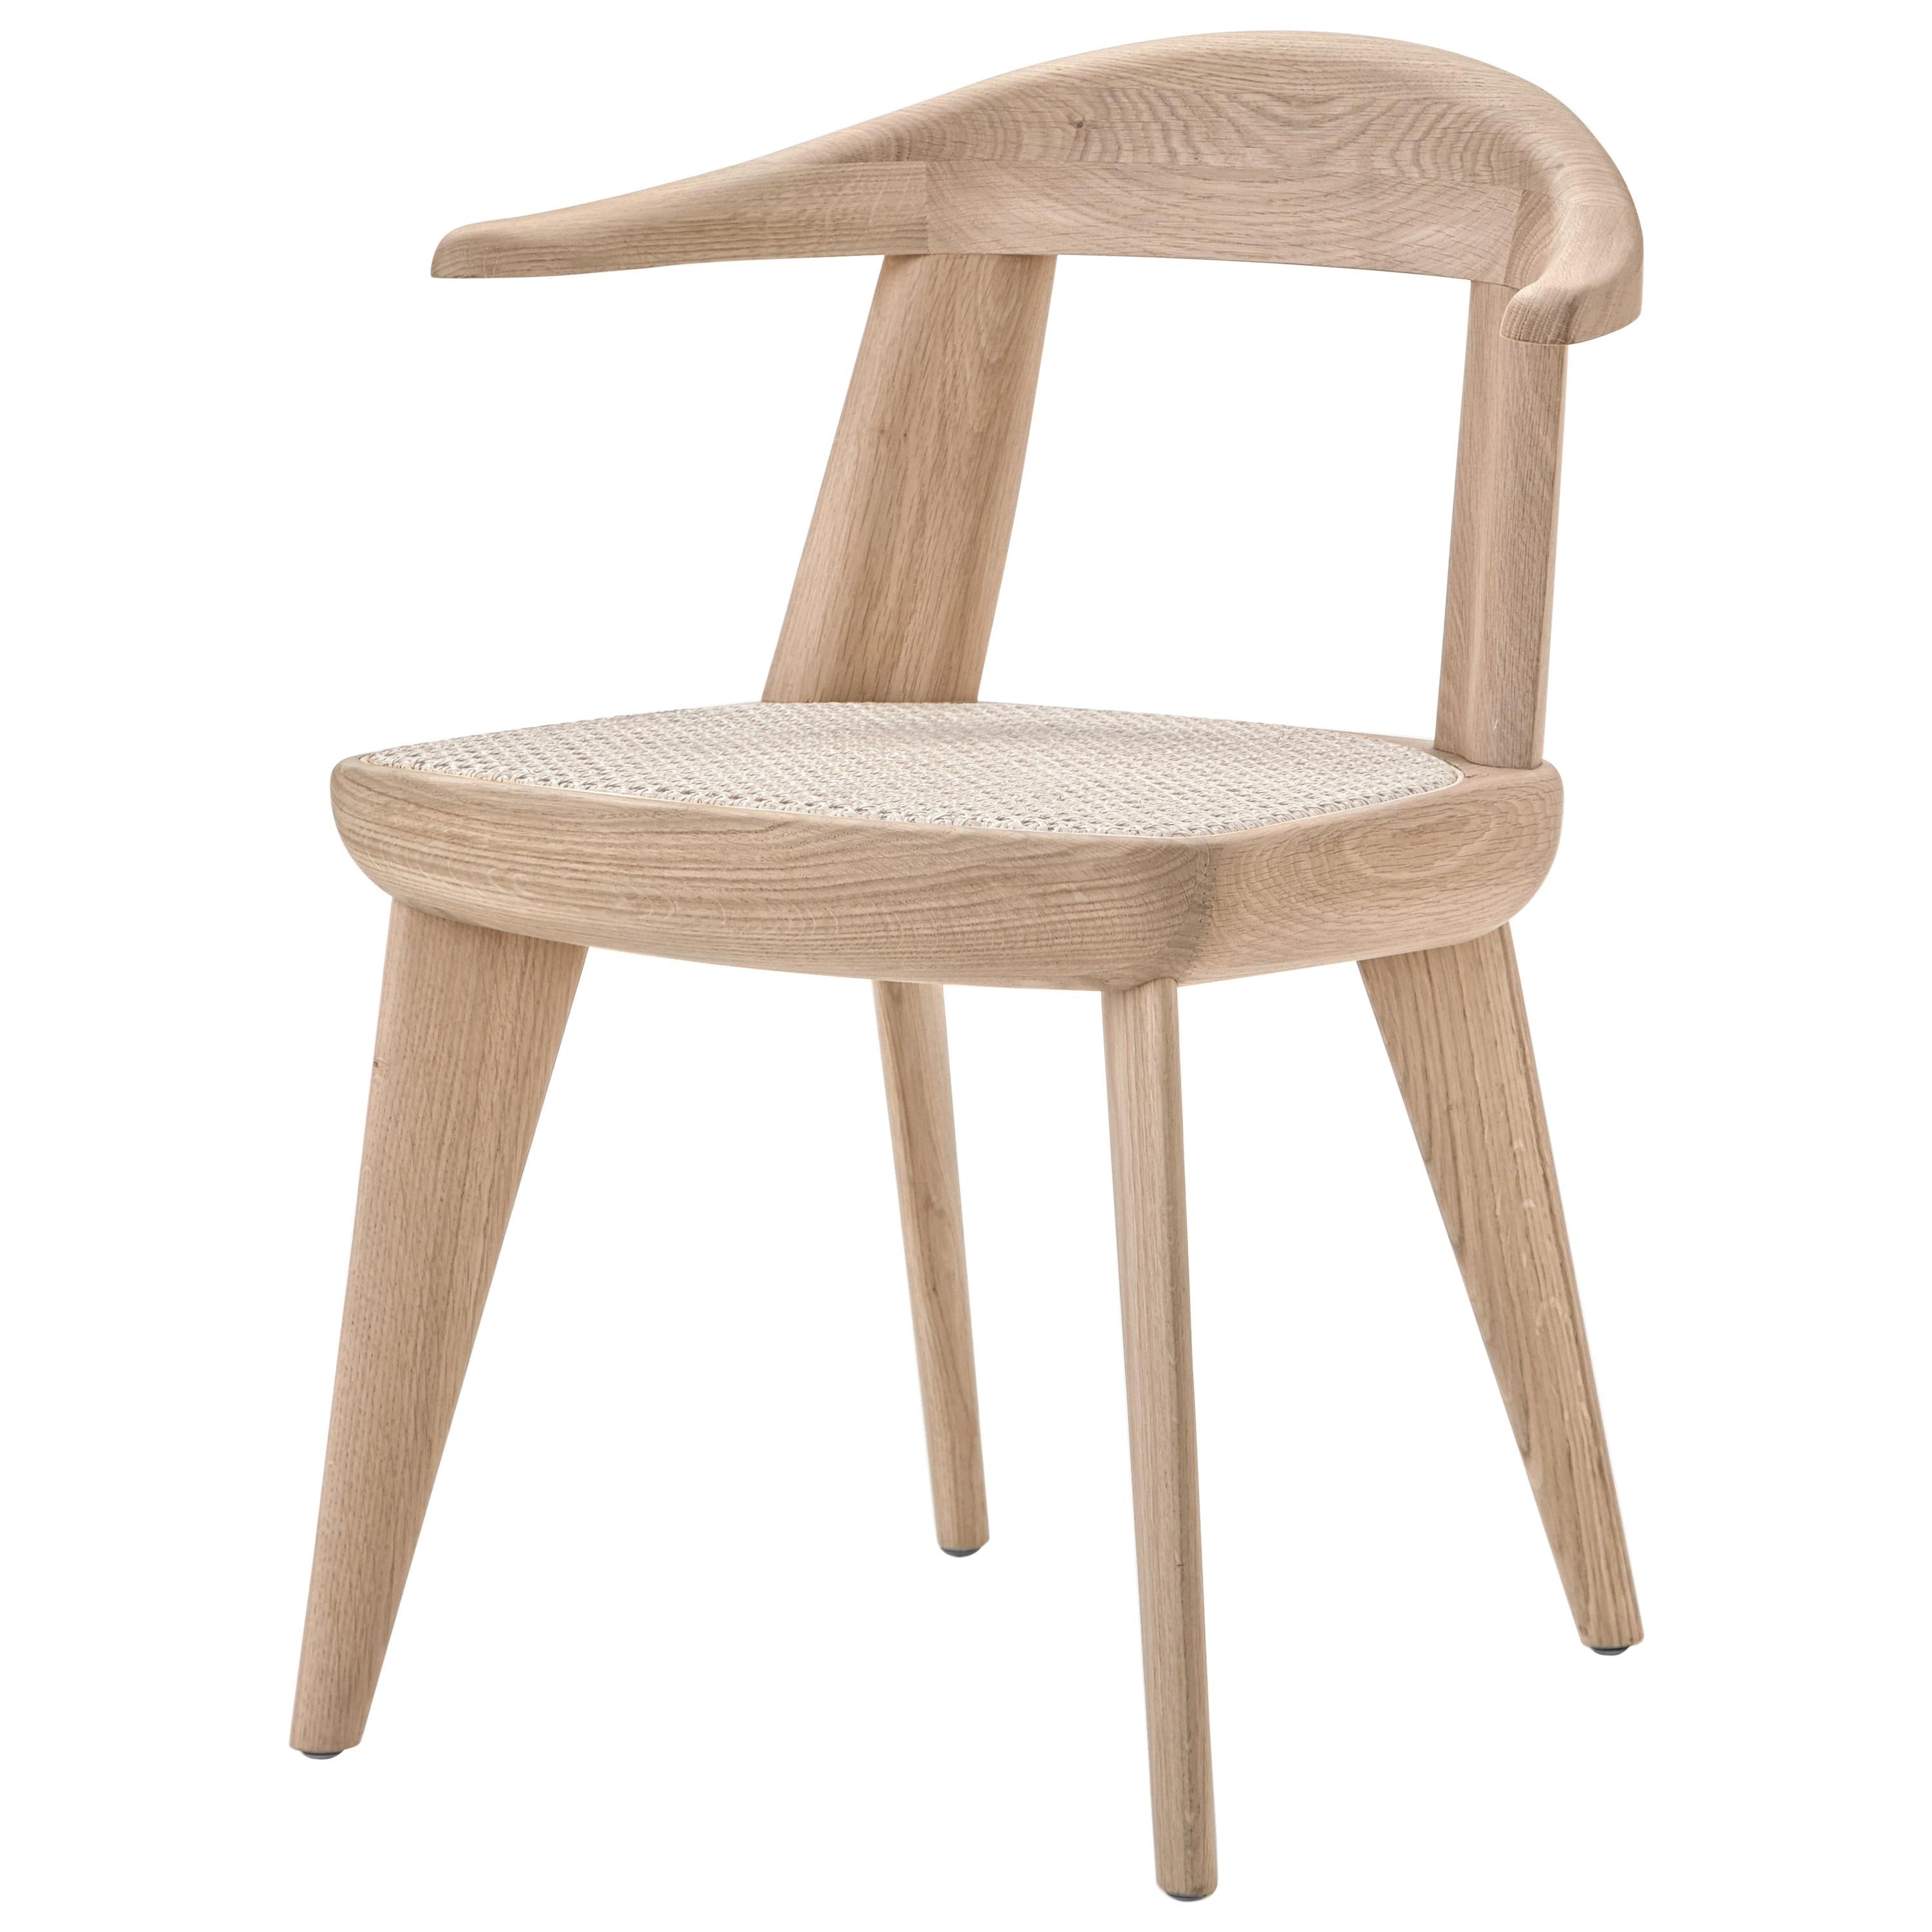 Brutus Armchair in Solid Wood with Cane Seat Designed by Craig Bassam